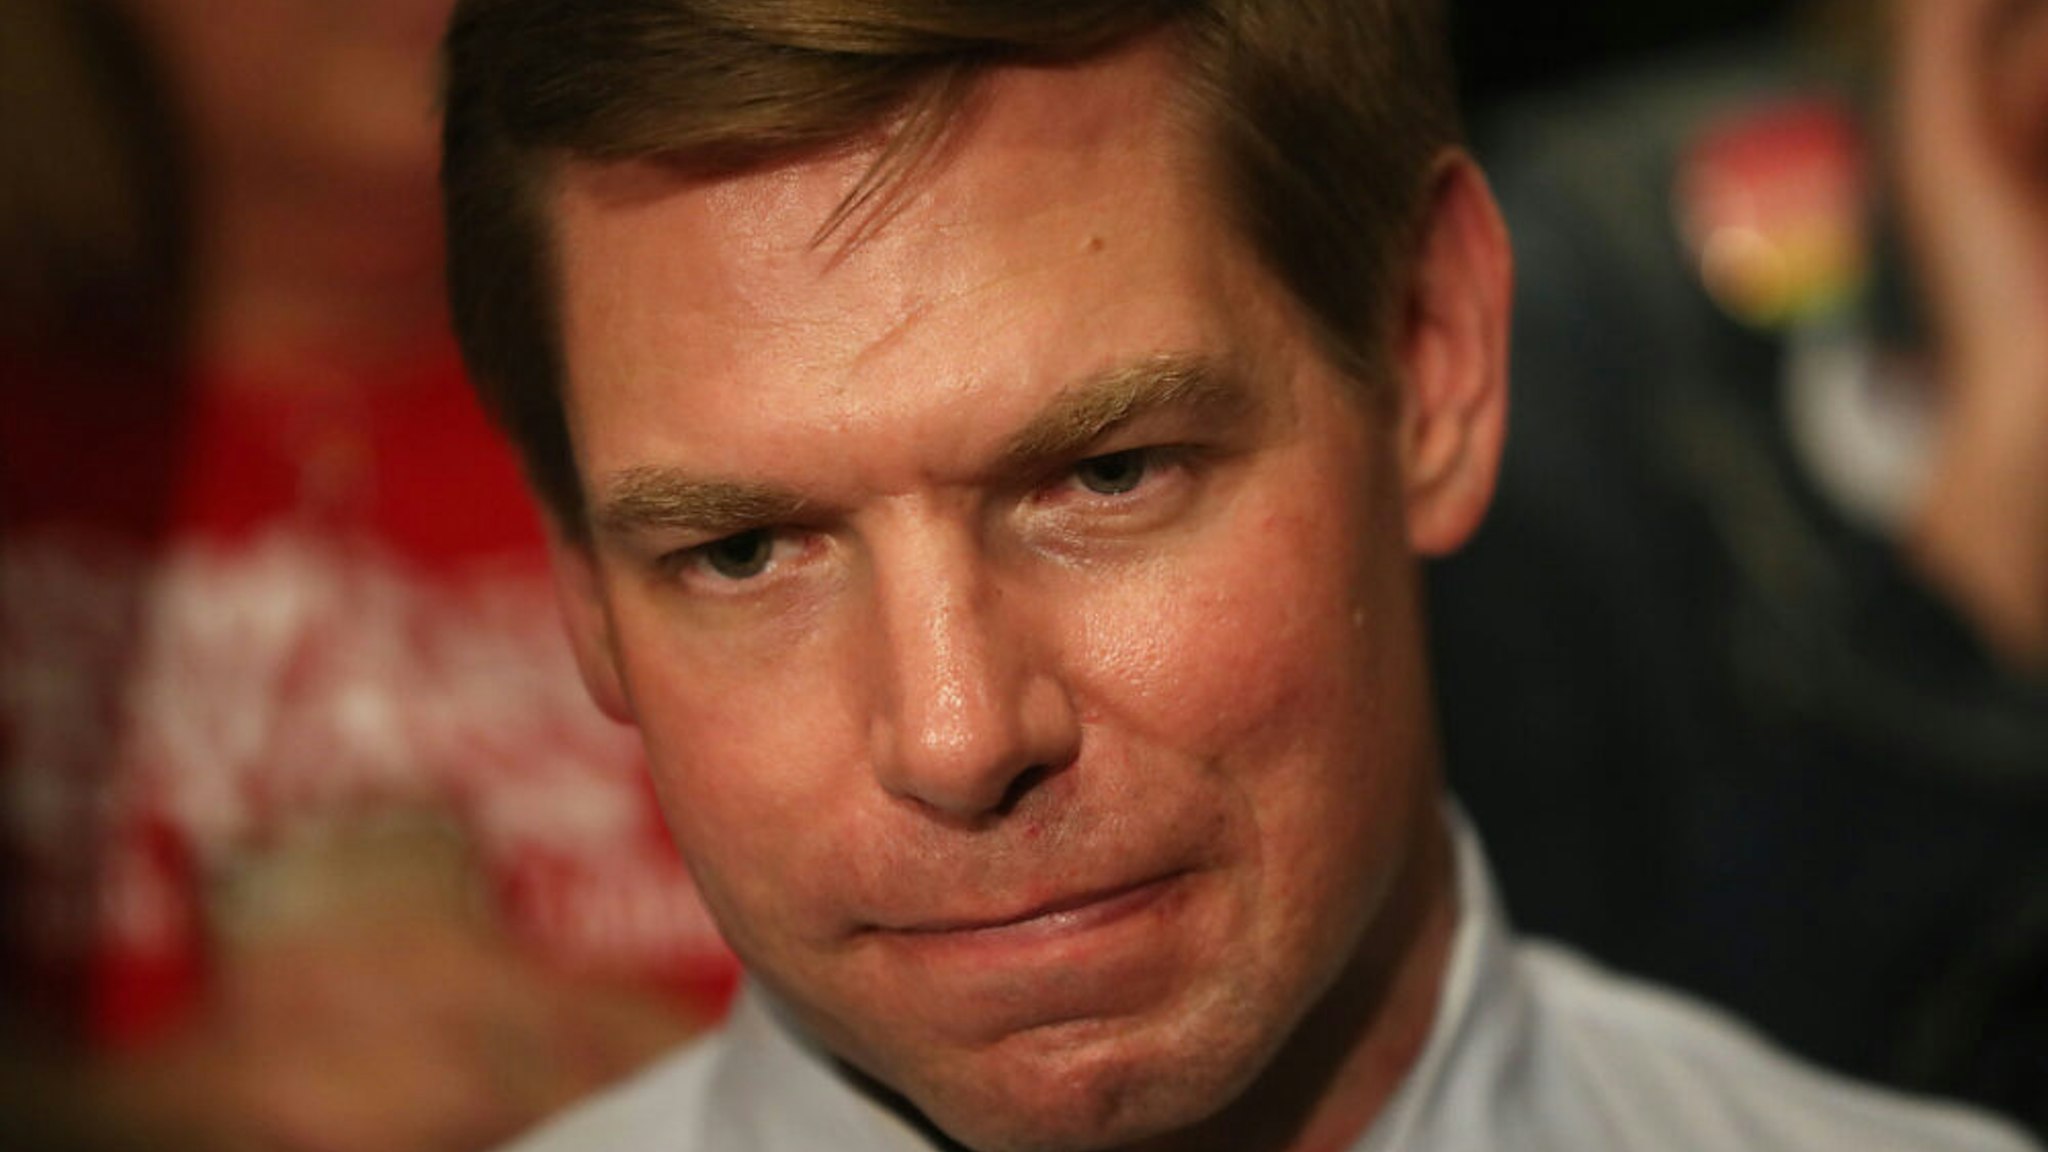 SUNRISE, FLORIDA - APRIL 09: Rep. Eric Swalwell (D-CA), who announced that he is running for president in 2020 speaks during a gun violence town hall at the BB&amp;T Center on April 09, 2019 in Sunrise, Florida. Rep. Swalwell held the town hall not far from Marjory Stoneman Douglas high school which was the site of a mass shooting in 2018.